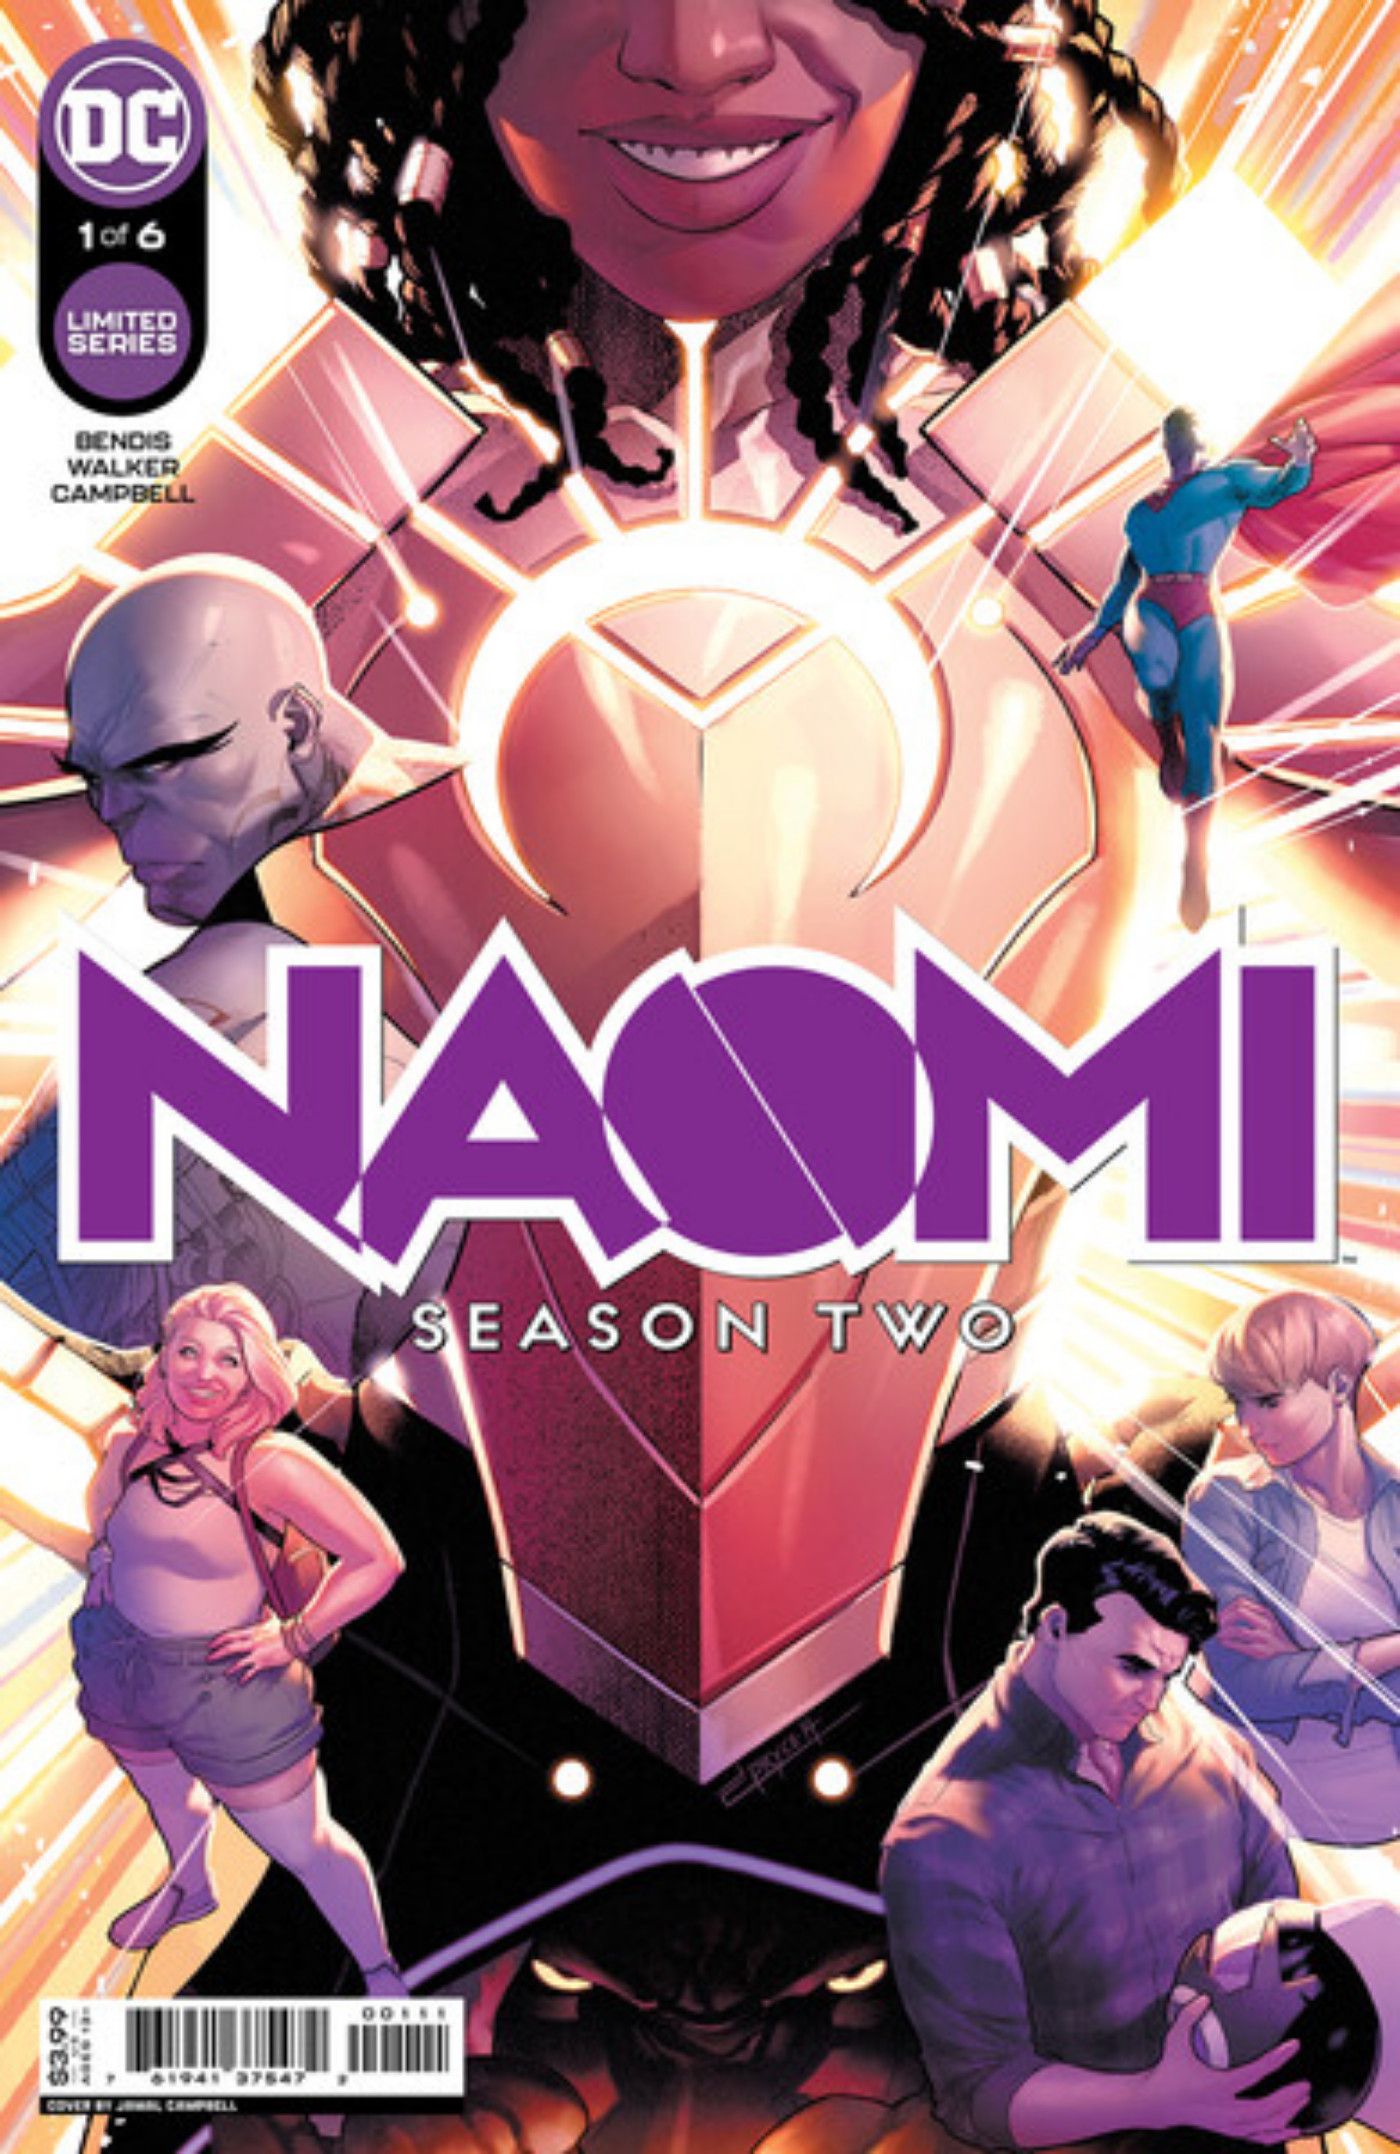 Naomi Season Two Sees the Justice League’s Best New Member Go Solo